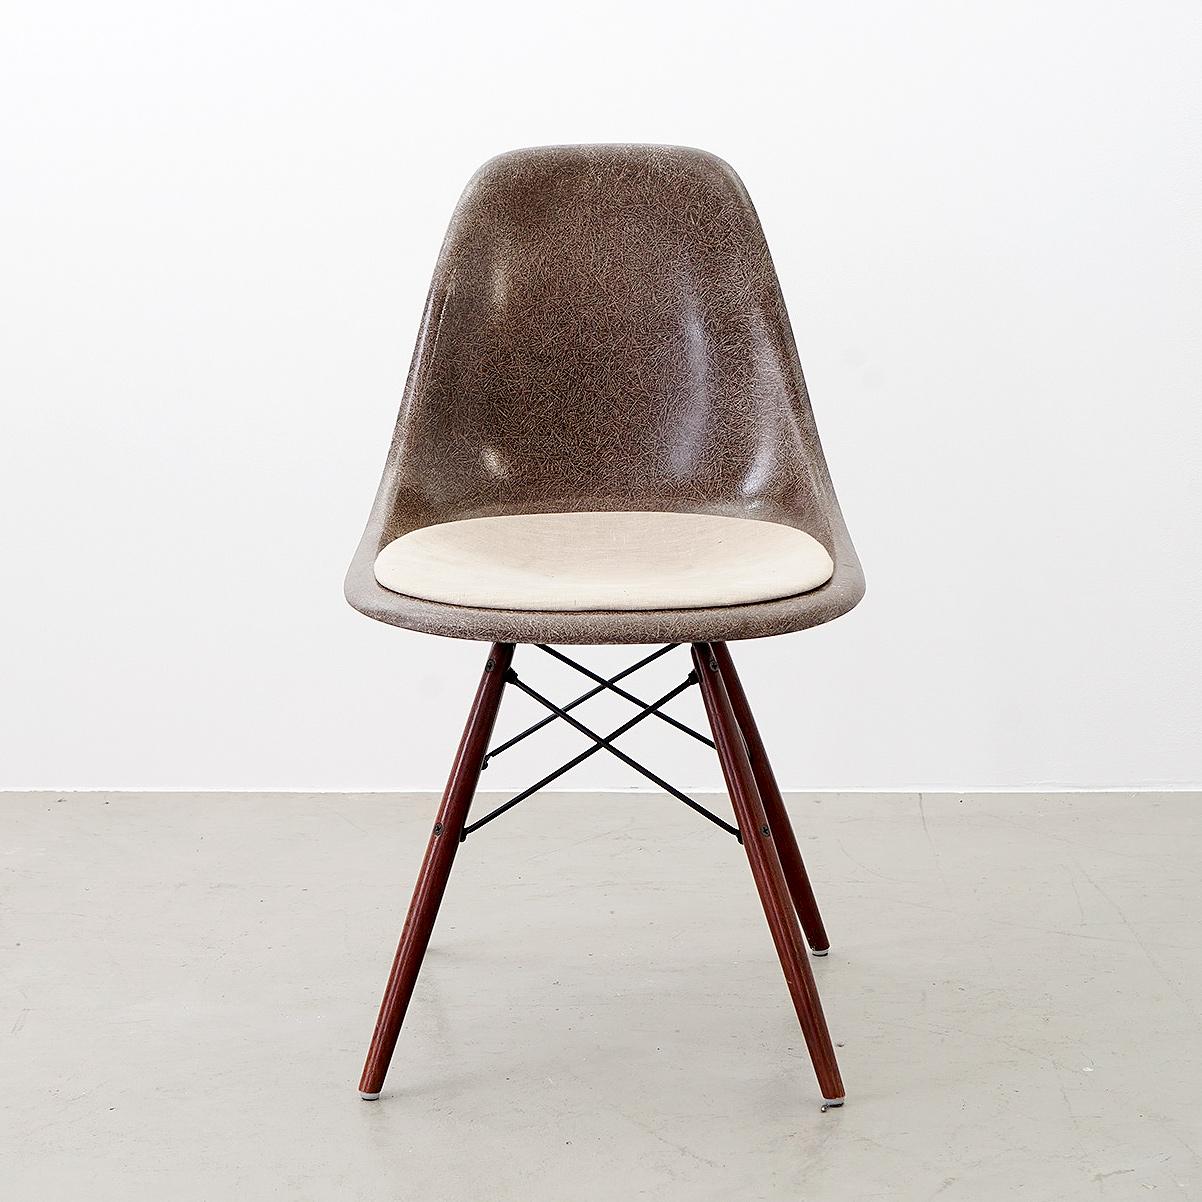 Designed by Charles and Ray Eames for a 1950 museum of modern art competition, the original Eames dining side chair (DSW) was the first industrially manufactured fiberglass-reinforced chair. The chair proved to be a groundbreaking innovation.
The